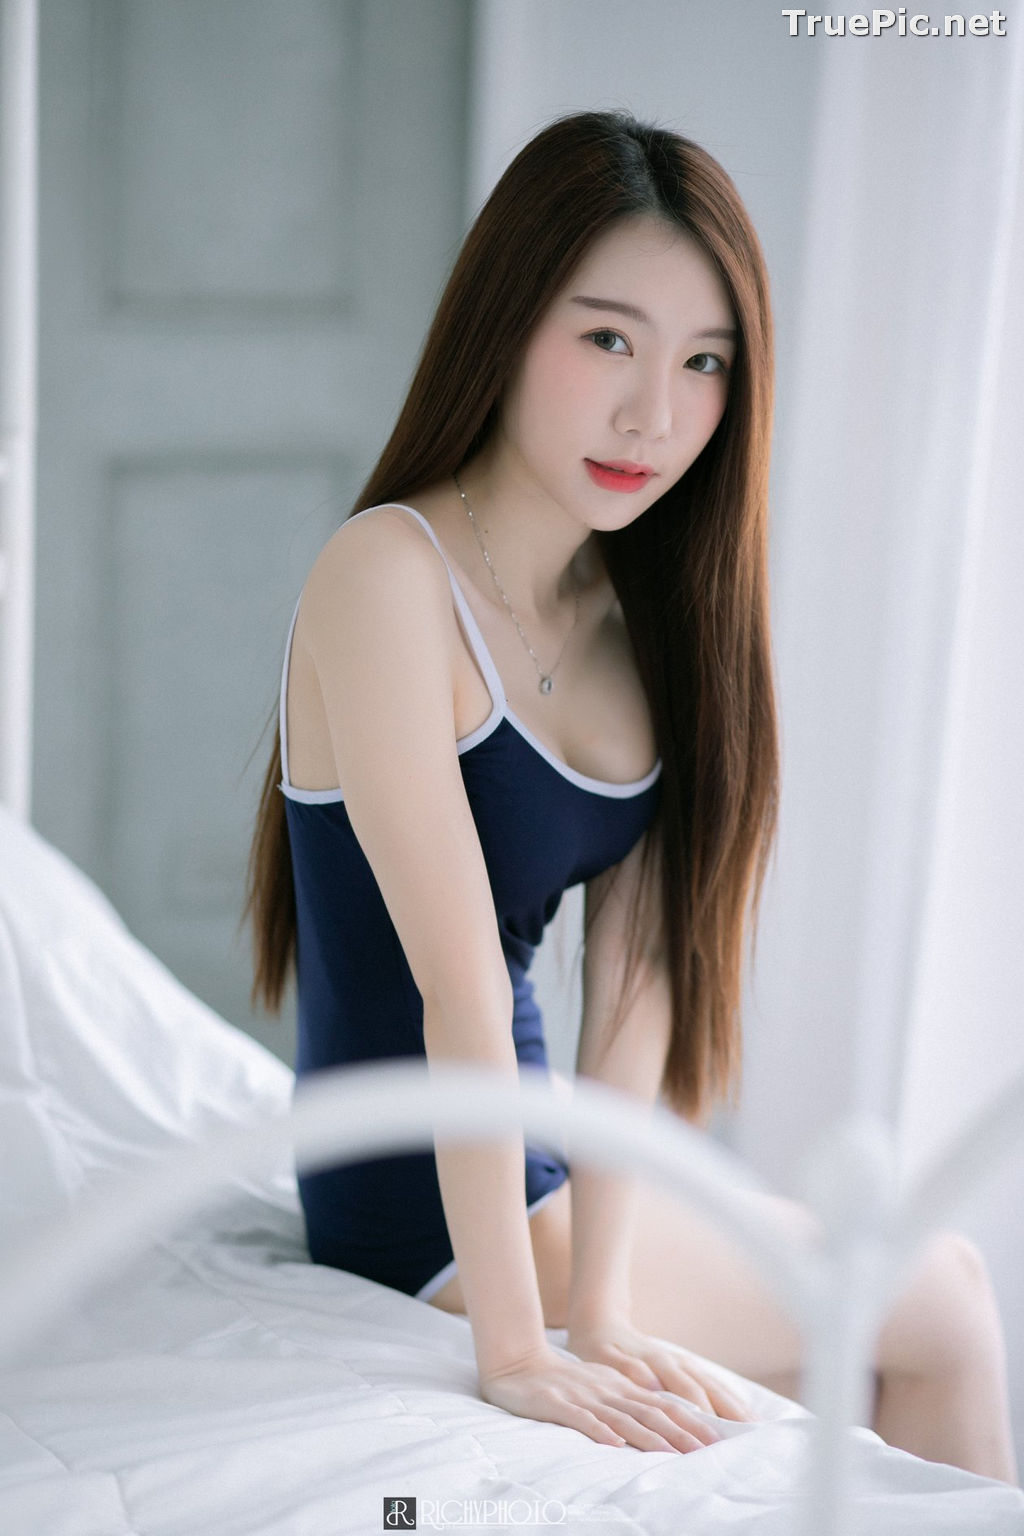 Image Thailand Model - Carolis Mok - Onepiece Swimsuit On The Bed - TruePic.net - Picture-15